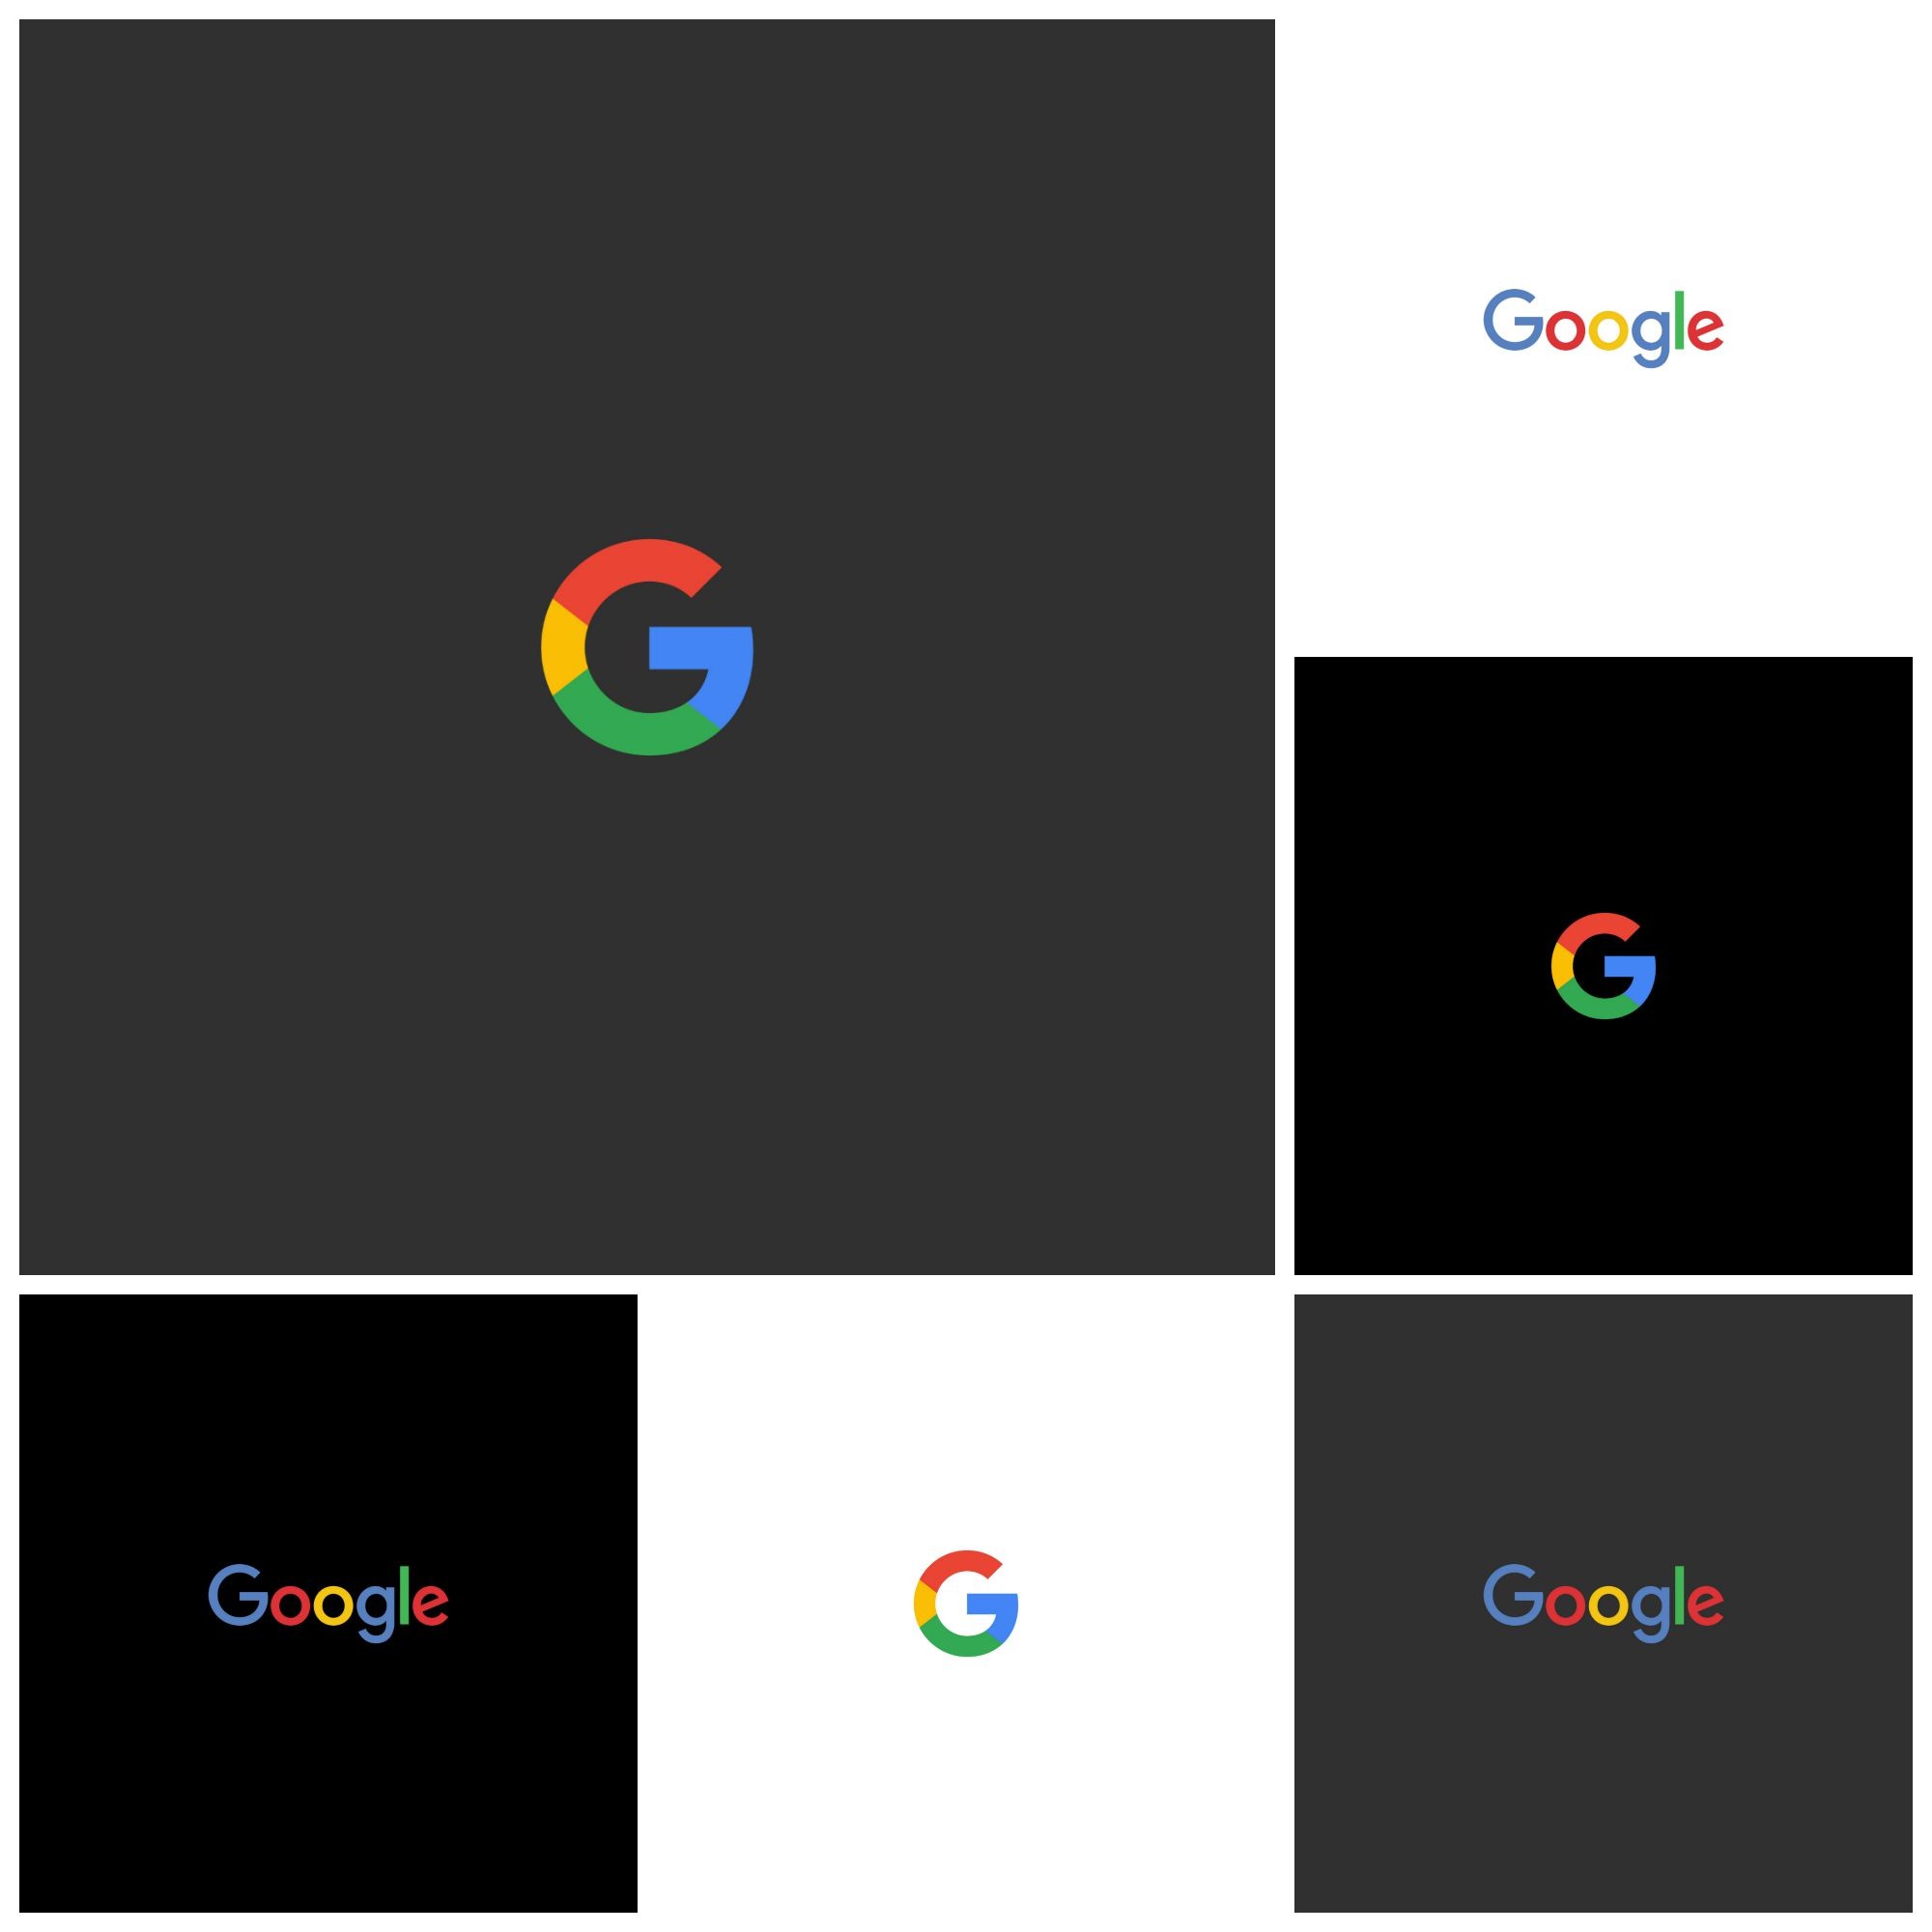 2000x2000 ... 4k Google Wallpapers (NEW LOGO) by shanewignall